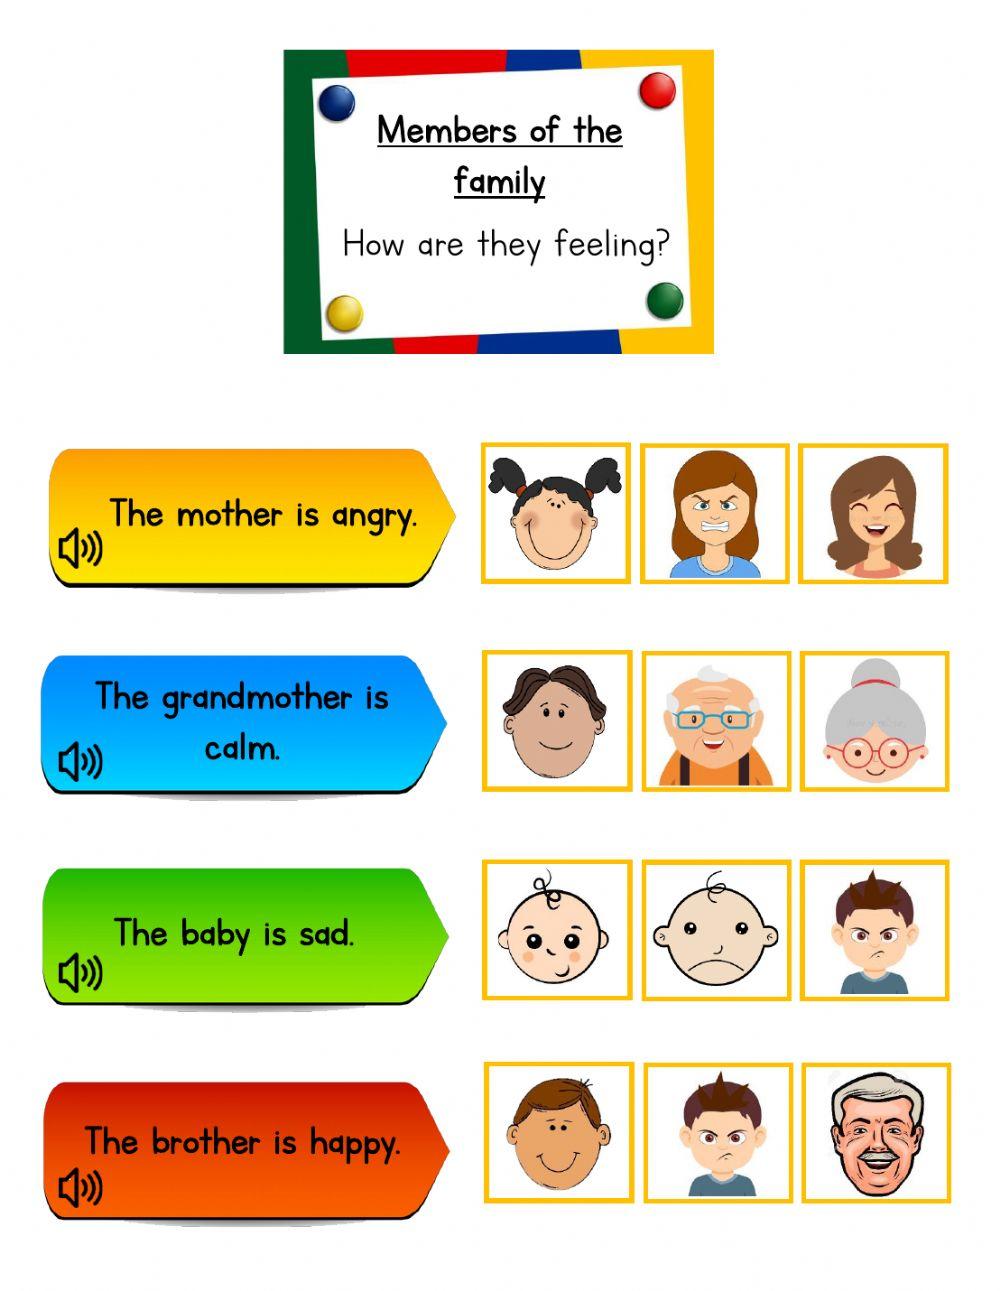 Family members and emotions